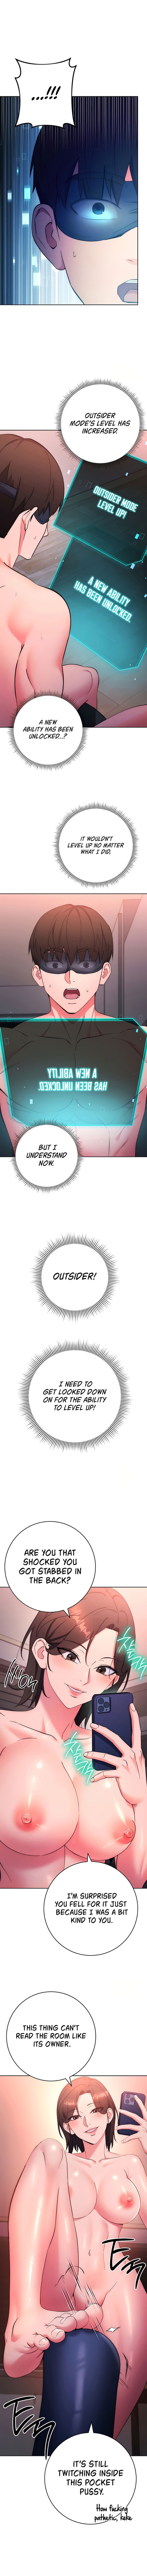 outsider-the-invisible-man-chap-9-1